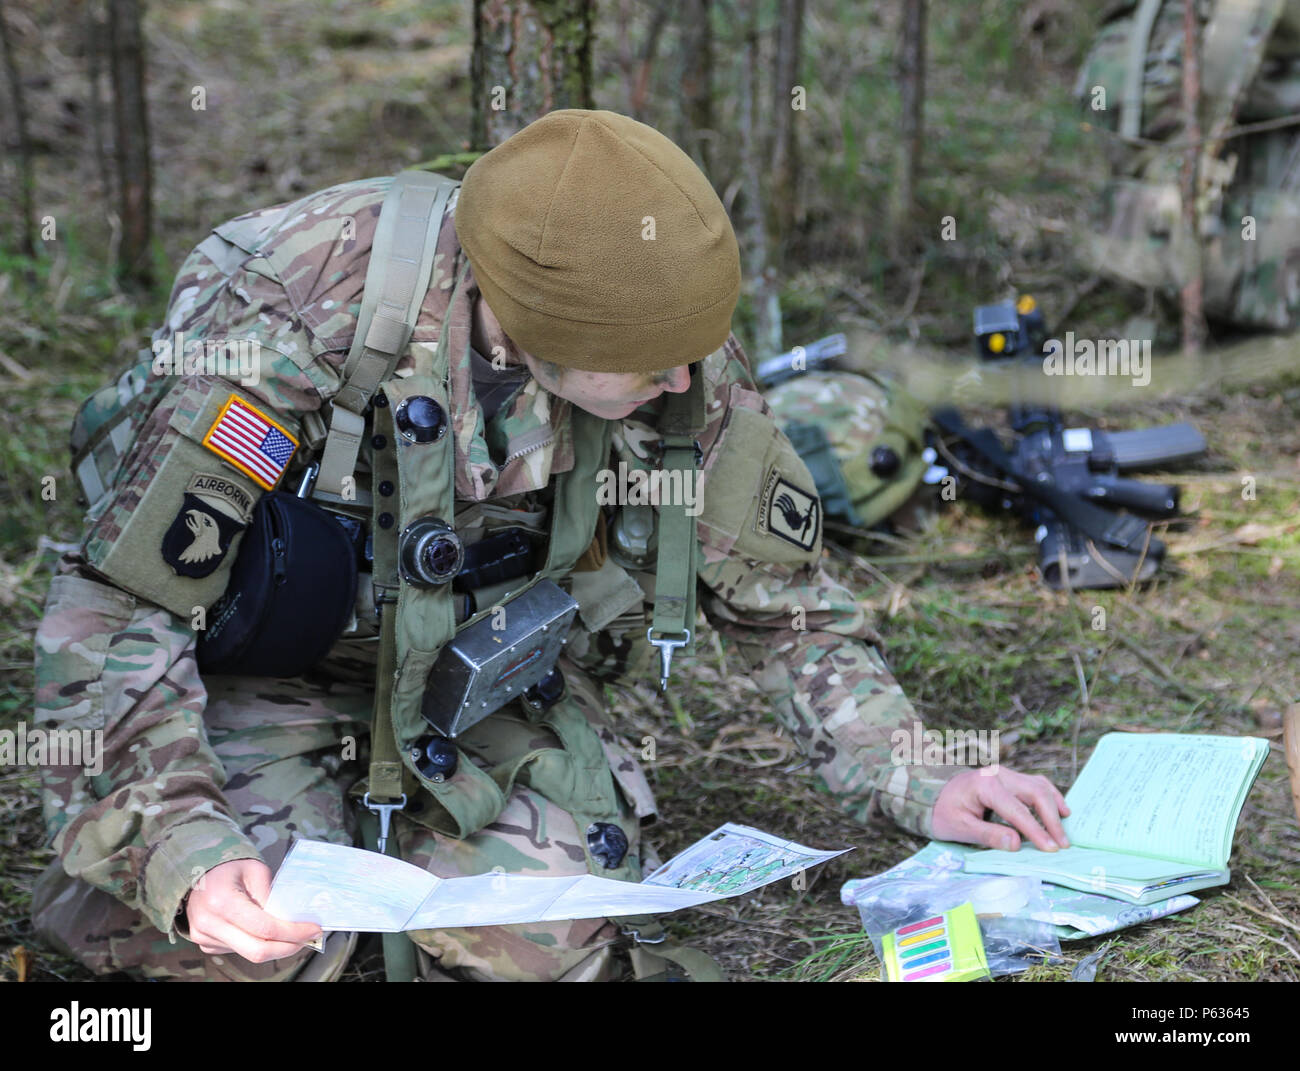 A U.S. Soldier of the 173rd Airborne updates a map while conduct a pre-missions brief during exercise Saber Junction 16 at the U.S. Army’s Joint Multinational Readiness Center (JMRC) in Hohenfels, Germany, April 13, 2016. Saber Junction 16 is the U.S. Army Europe’s 173rd Airborne Brigade’s combat training center certification exercise, taking place at the JMRC in Hohenfels, Germany, Mar. 31-Apr. 24, 2016.  The exercise is designed to evaluate the readiness of the Army’s Europe-based combat brigades to conduct unified land operations and promote interoperability in a joint, multinational enviro Stock Photo